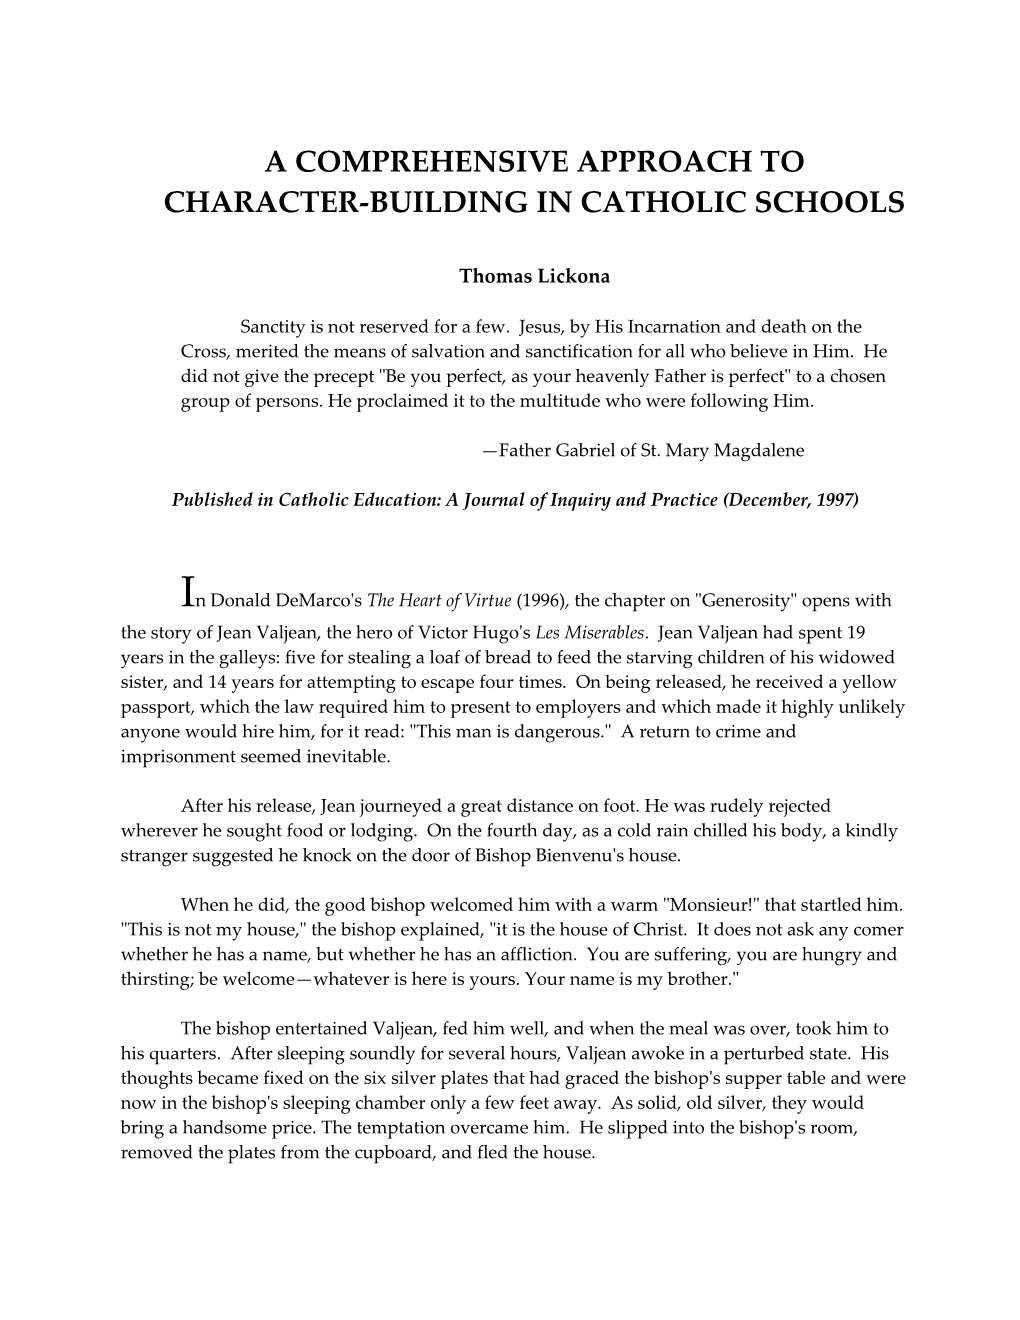 A Comprehensive Approach to Character-Building in Catholic Schools